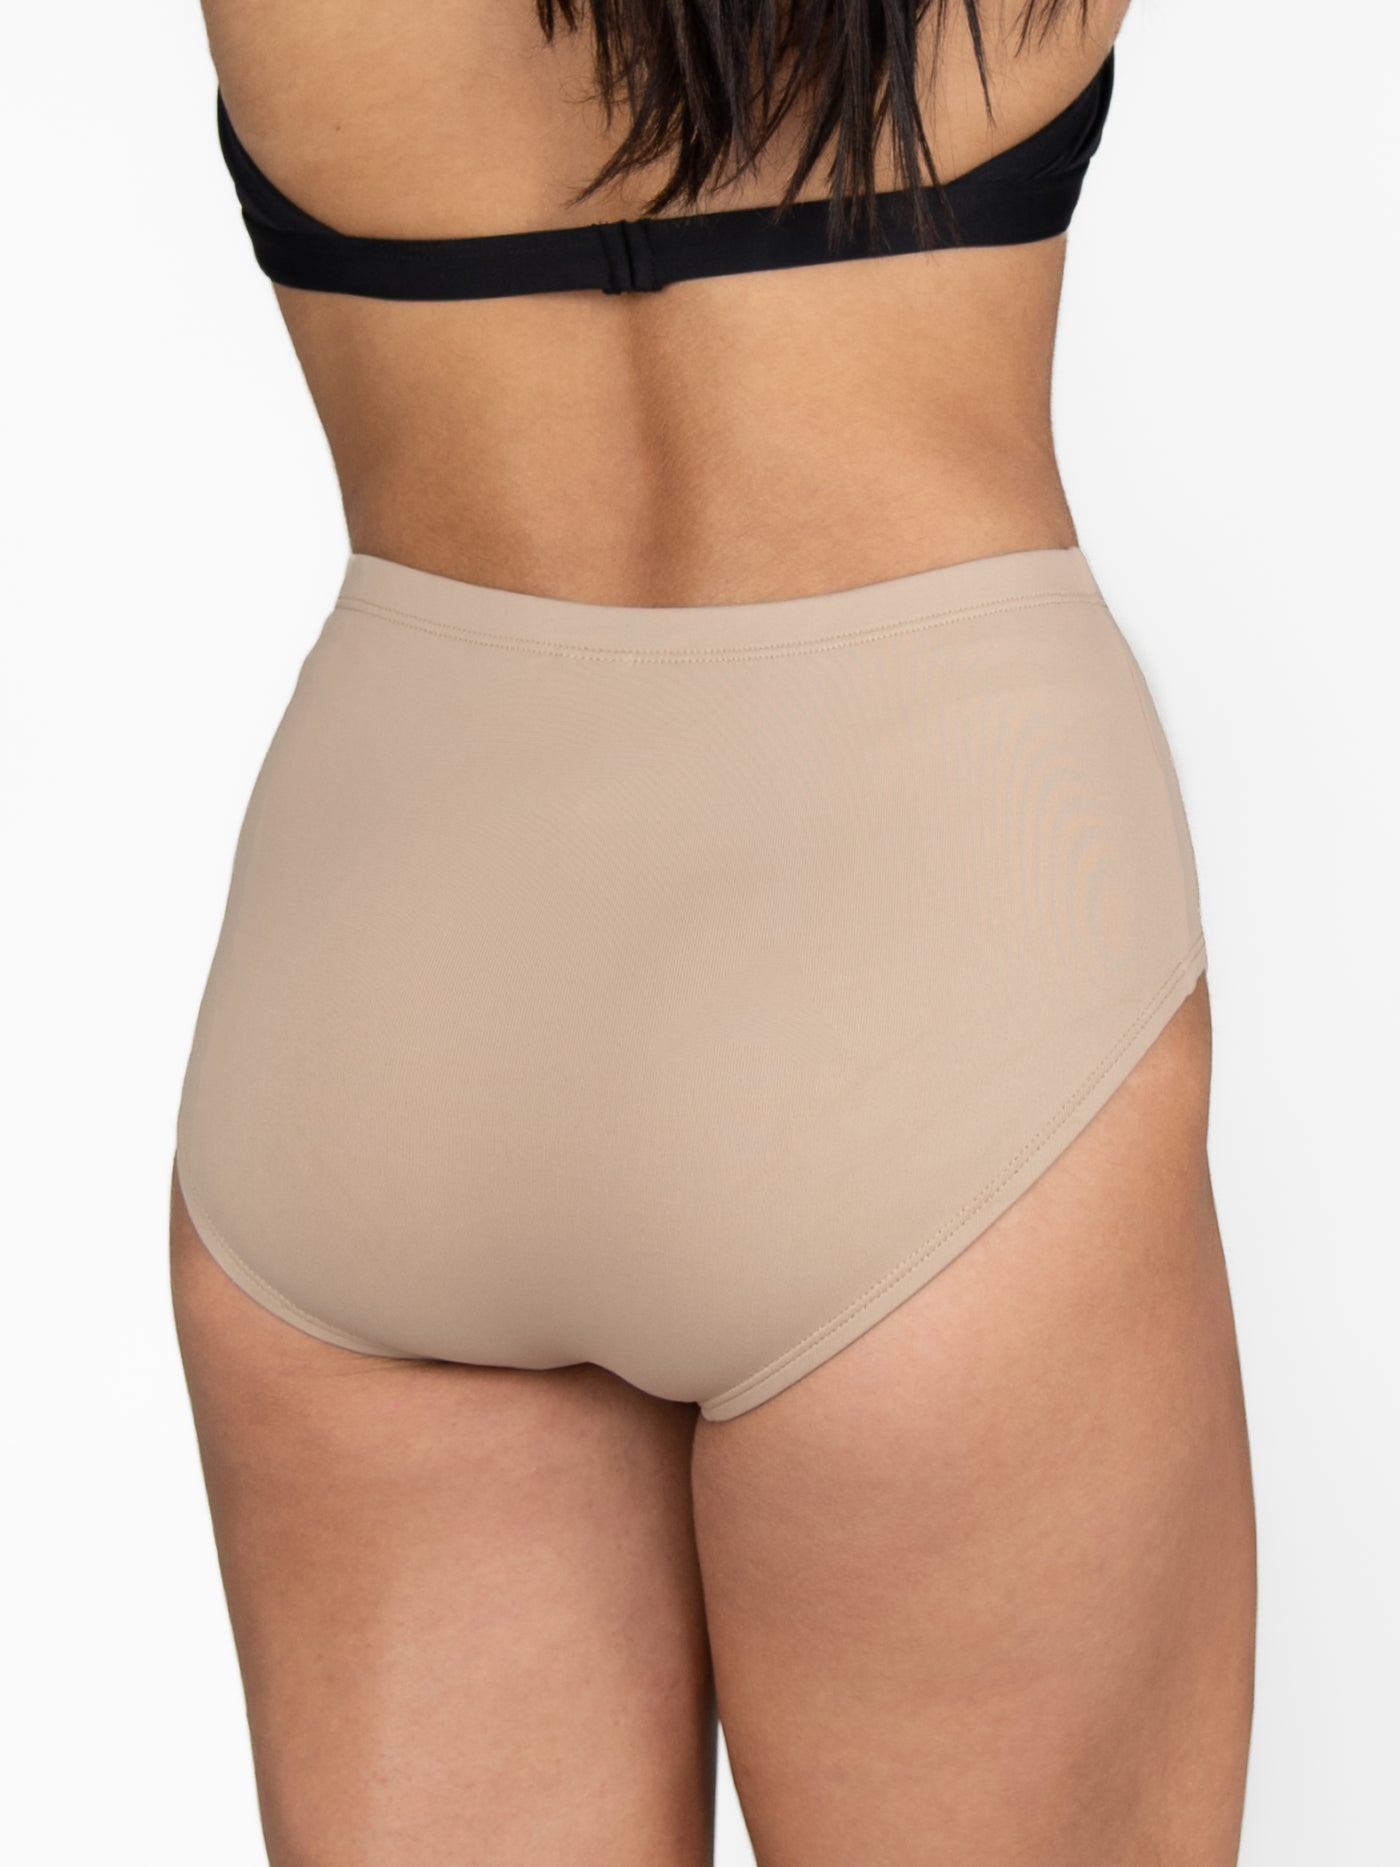 ProWEAR Athletic Brief - GIRLS – Body Wrappers